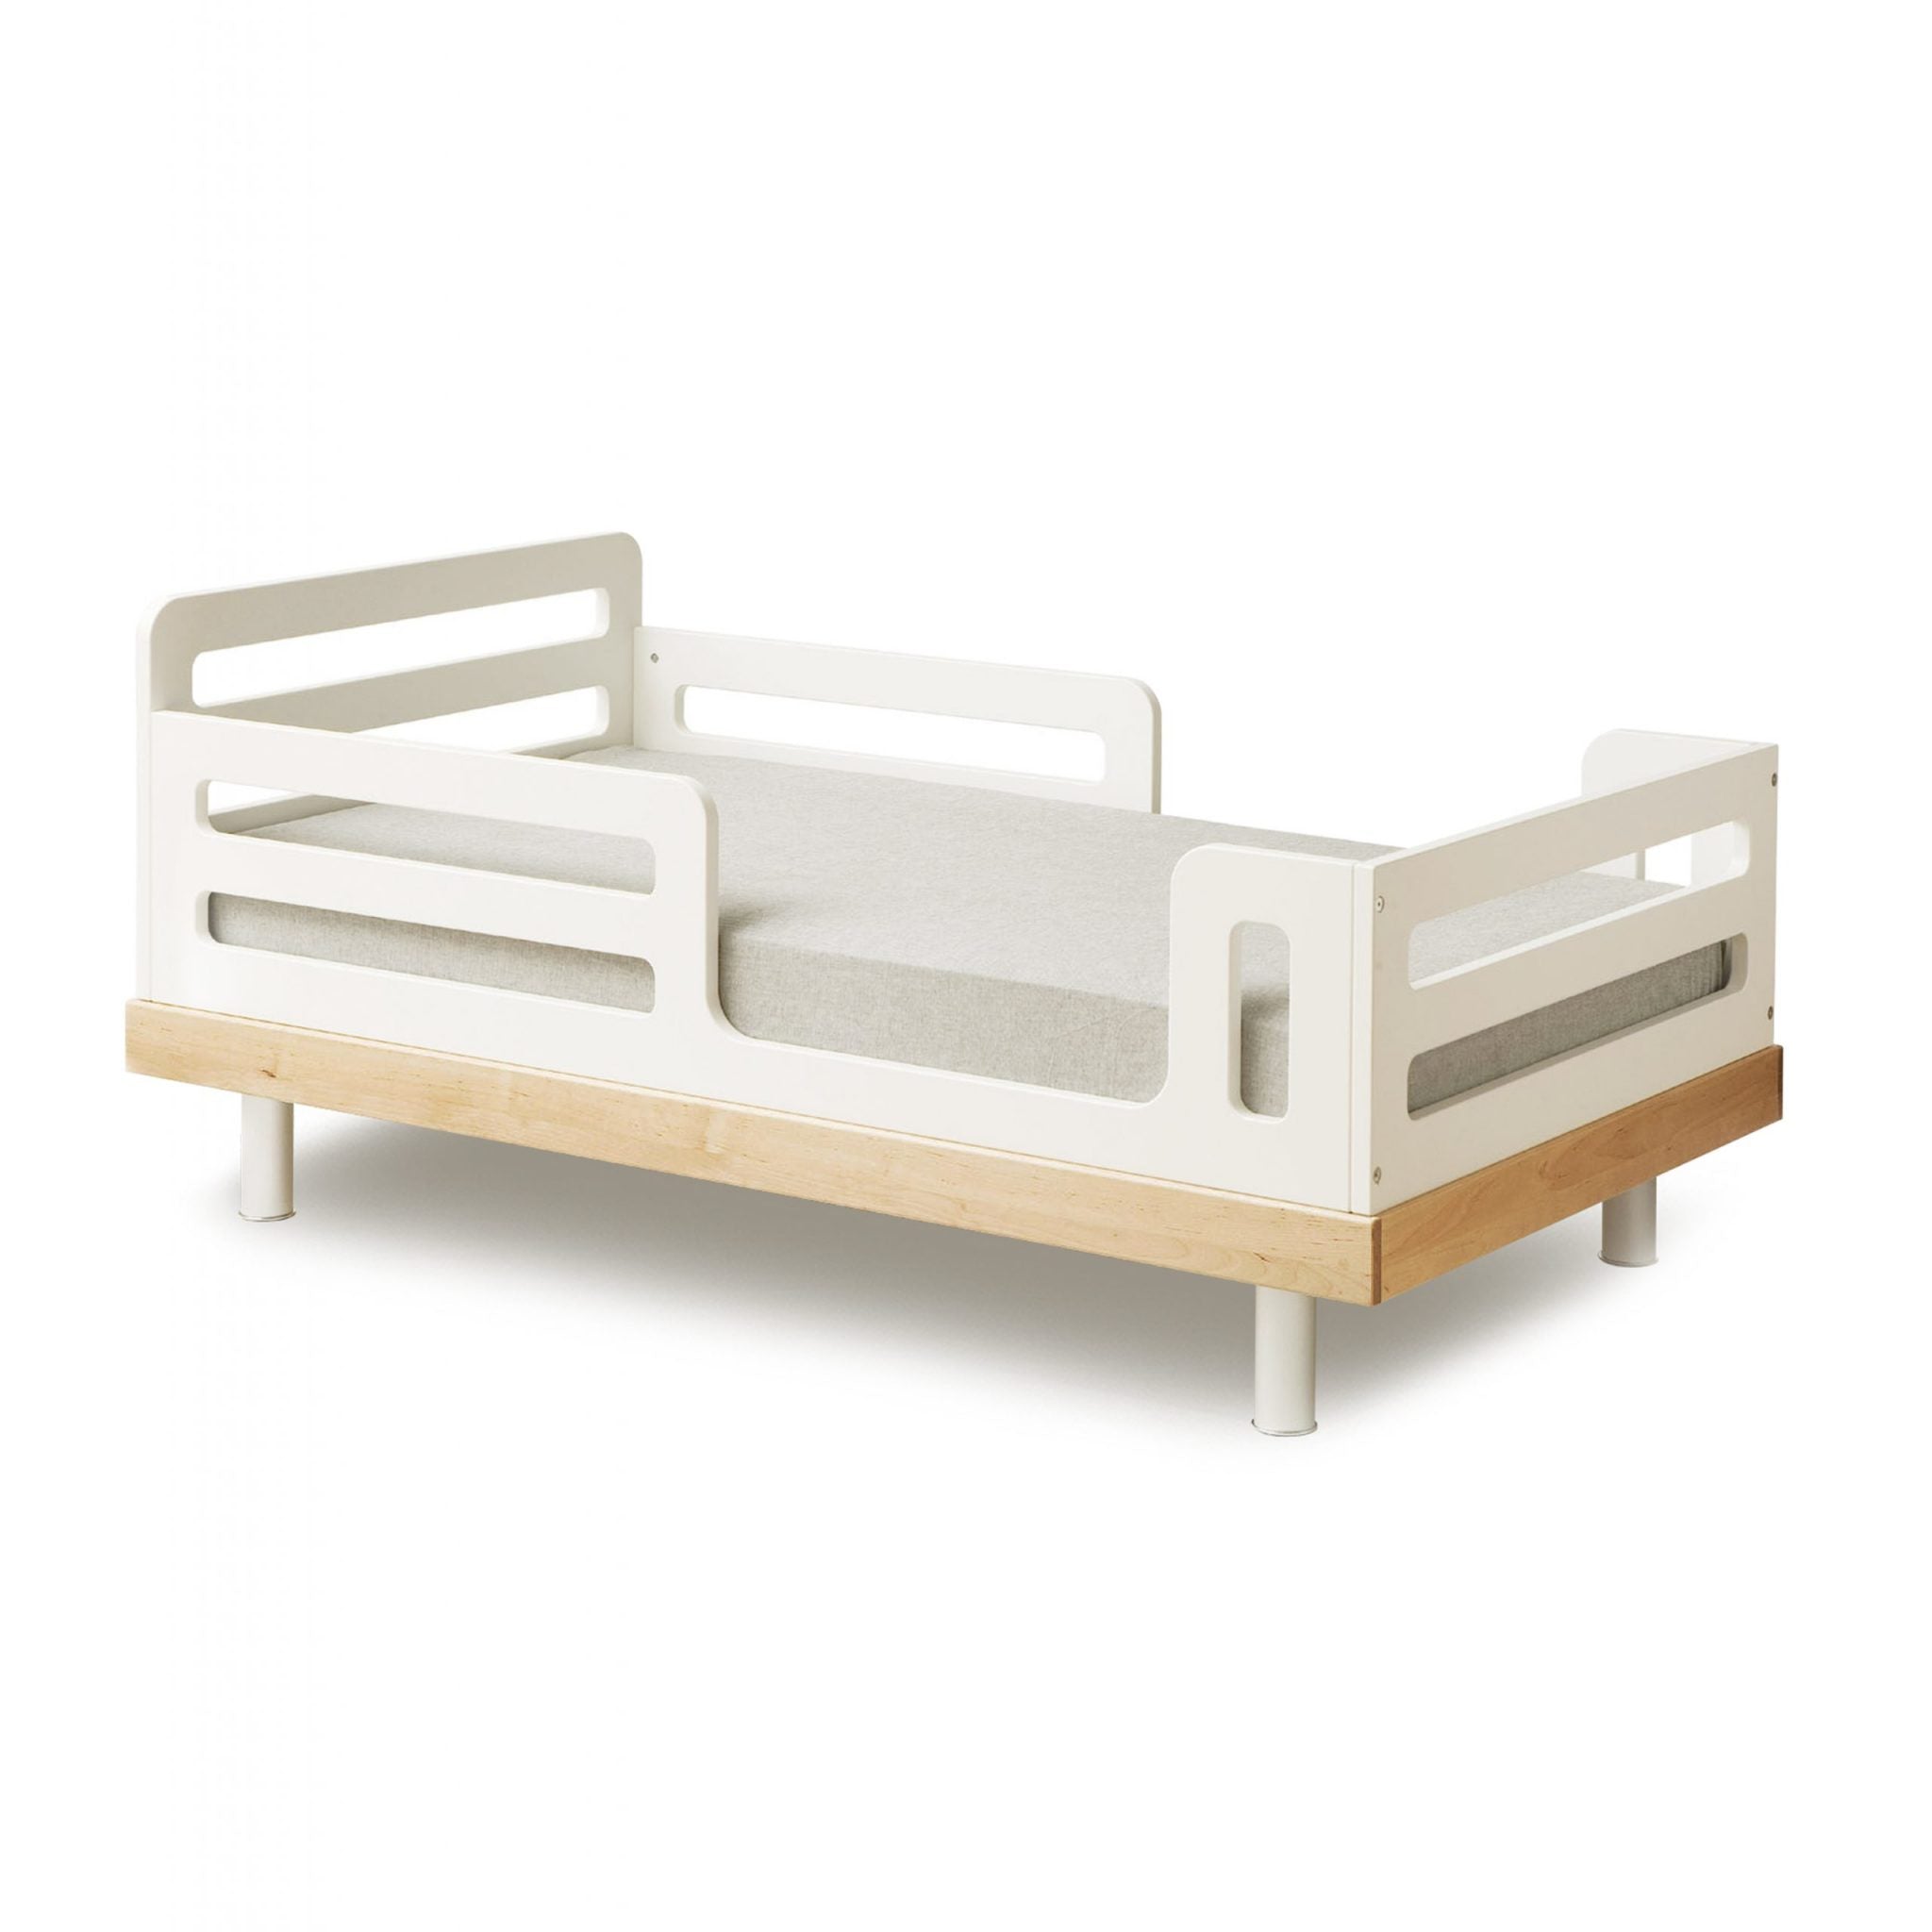 Oeuf Classic Toddler Bed in White & Birch